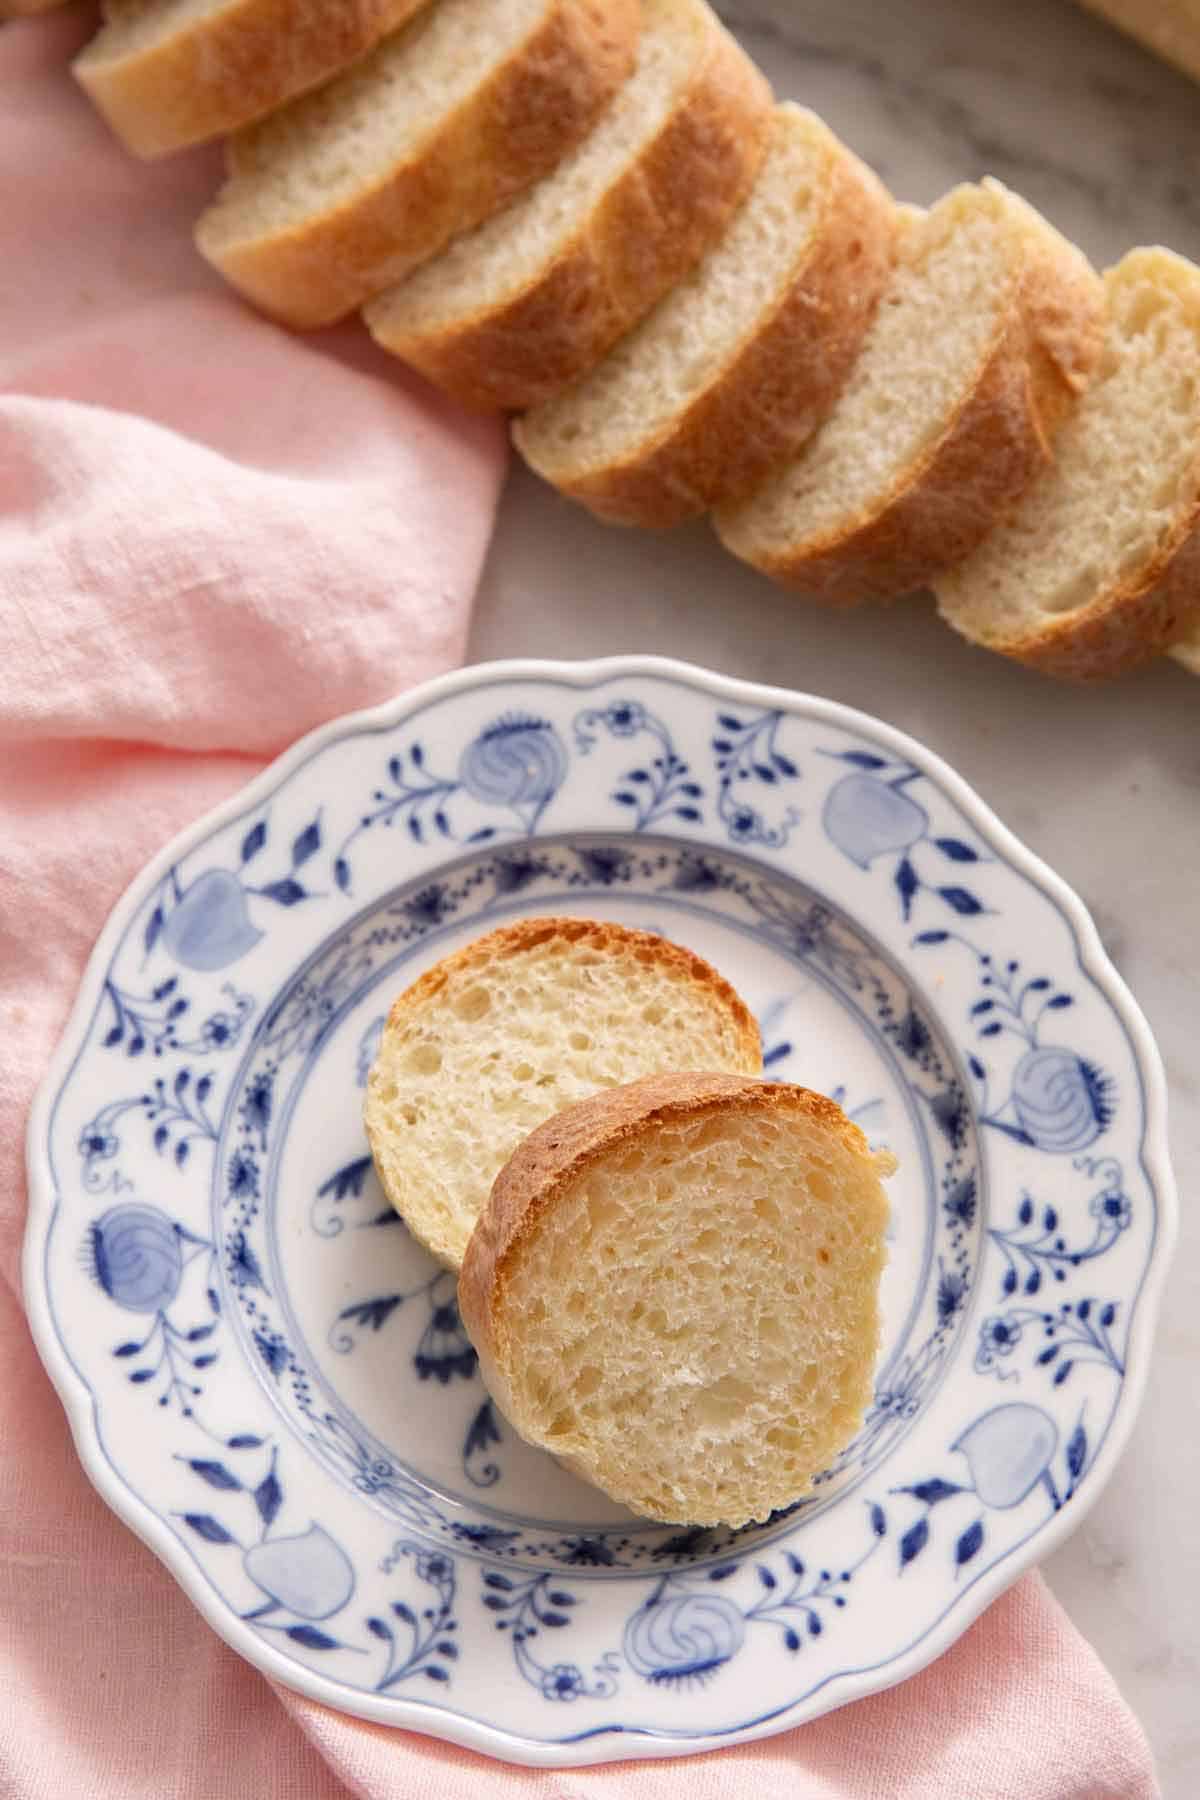 A plate with two slices of French bread with a sliced loaf in the background.